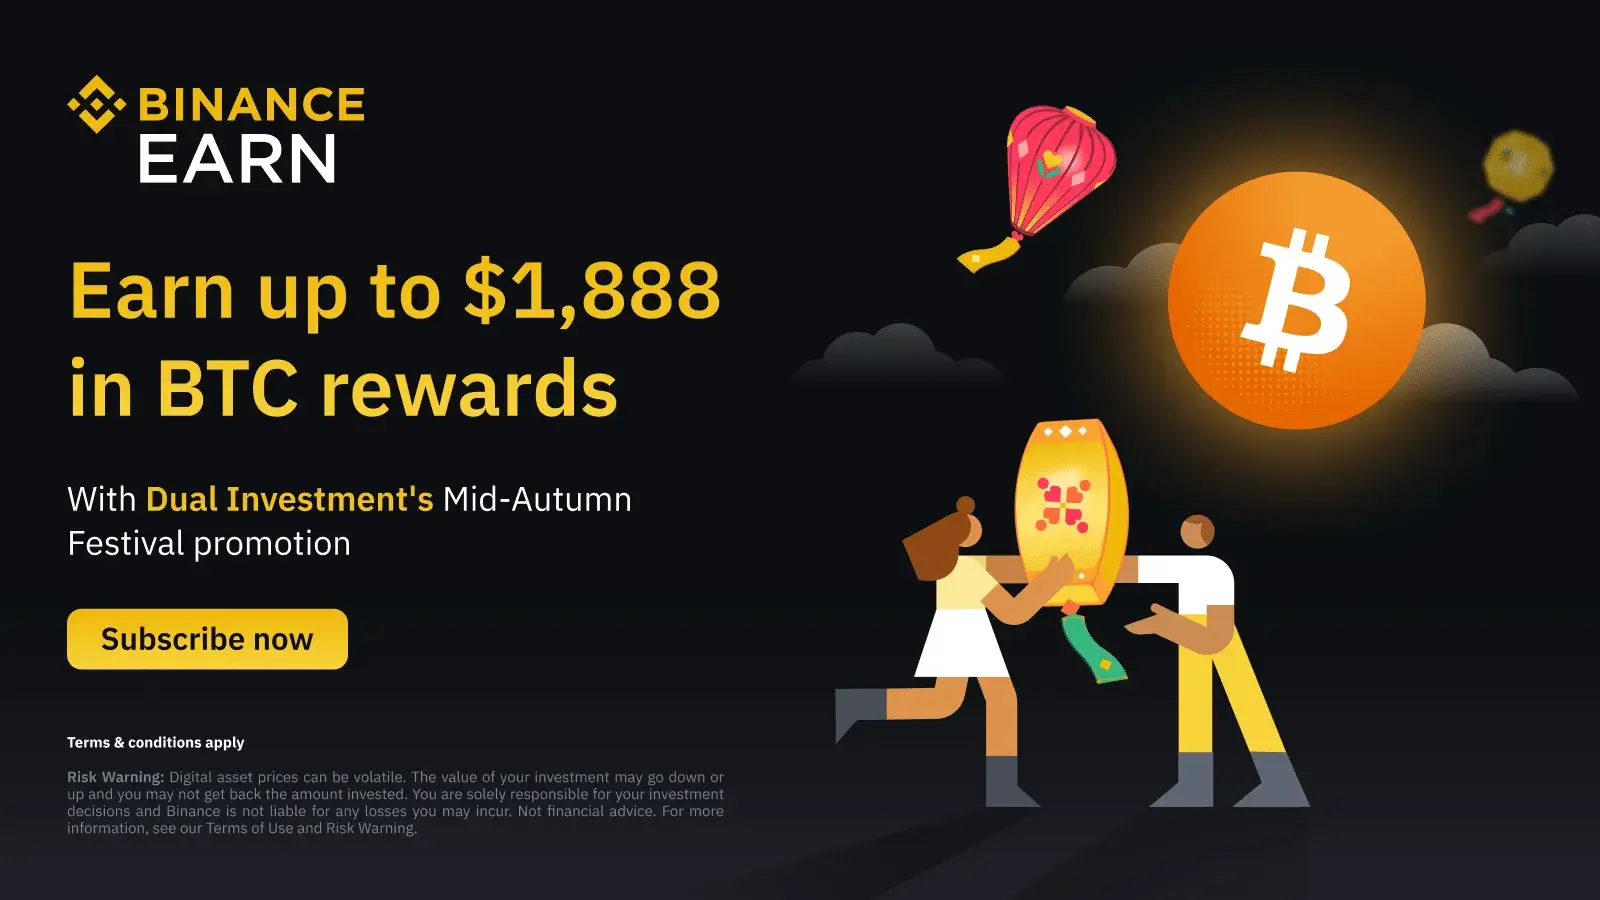 5. Binance - Earn Up to $18,888 in BTC Vouchers!